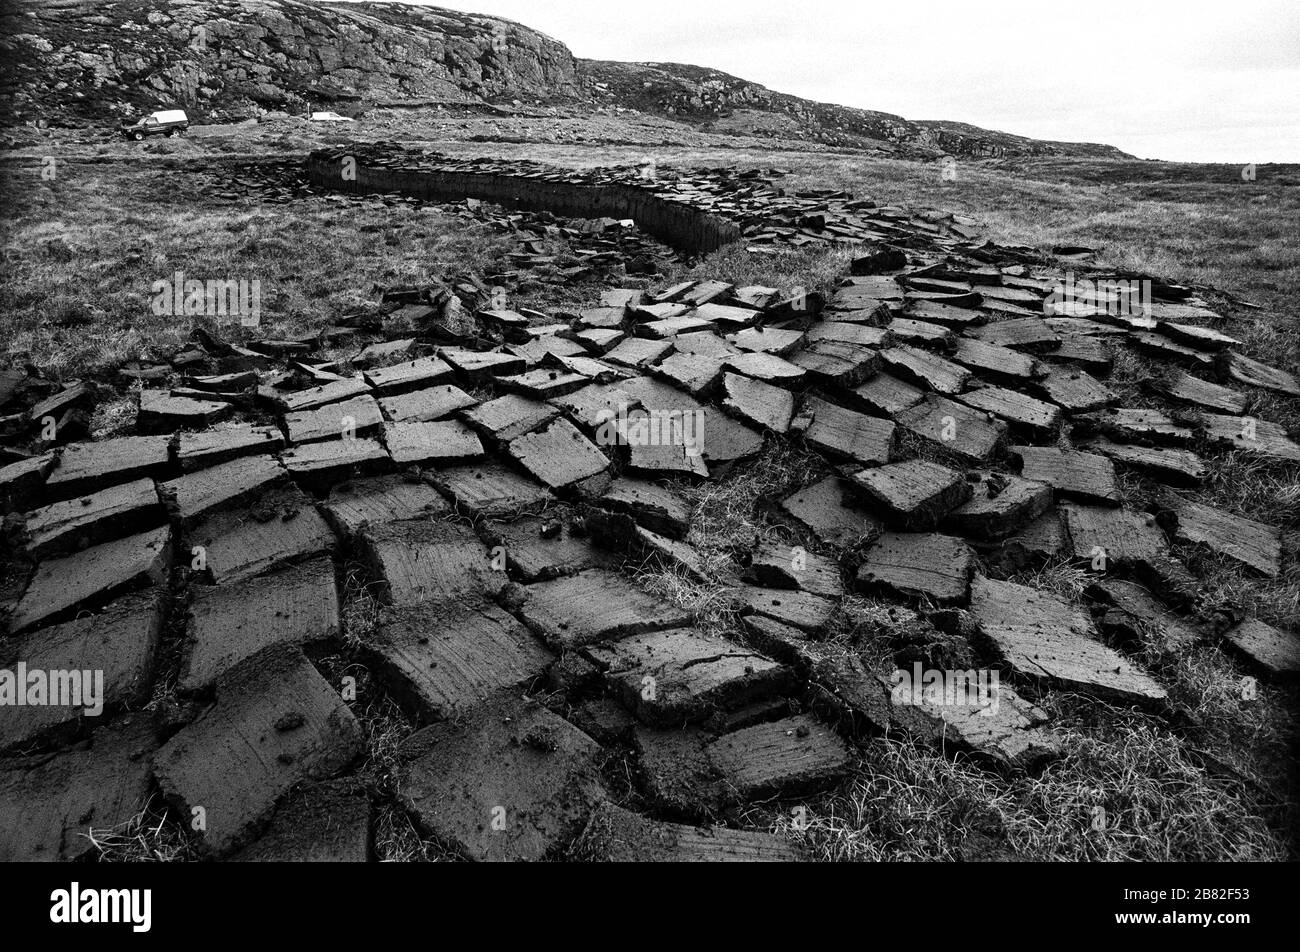 Freshly cut peat bogs on a stretch of land on the island of Lewis in the Outer Hebrides, Scotland. Peat cutting was a traditional method of gathering fuel for the winter in the sparsely-populated areas on Scotland's west coast and islands. The peat was dried and used in fires and ovens. Stock Photo